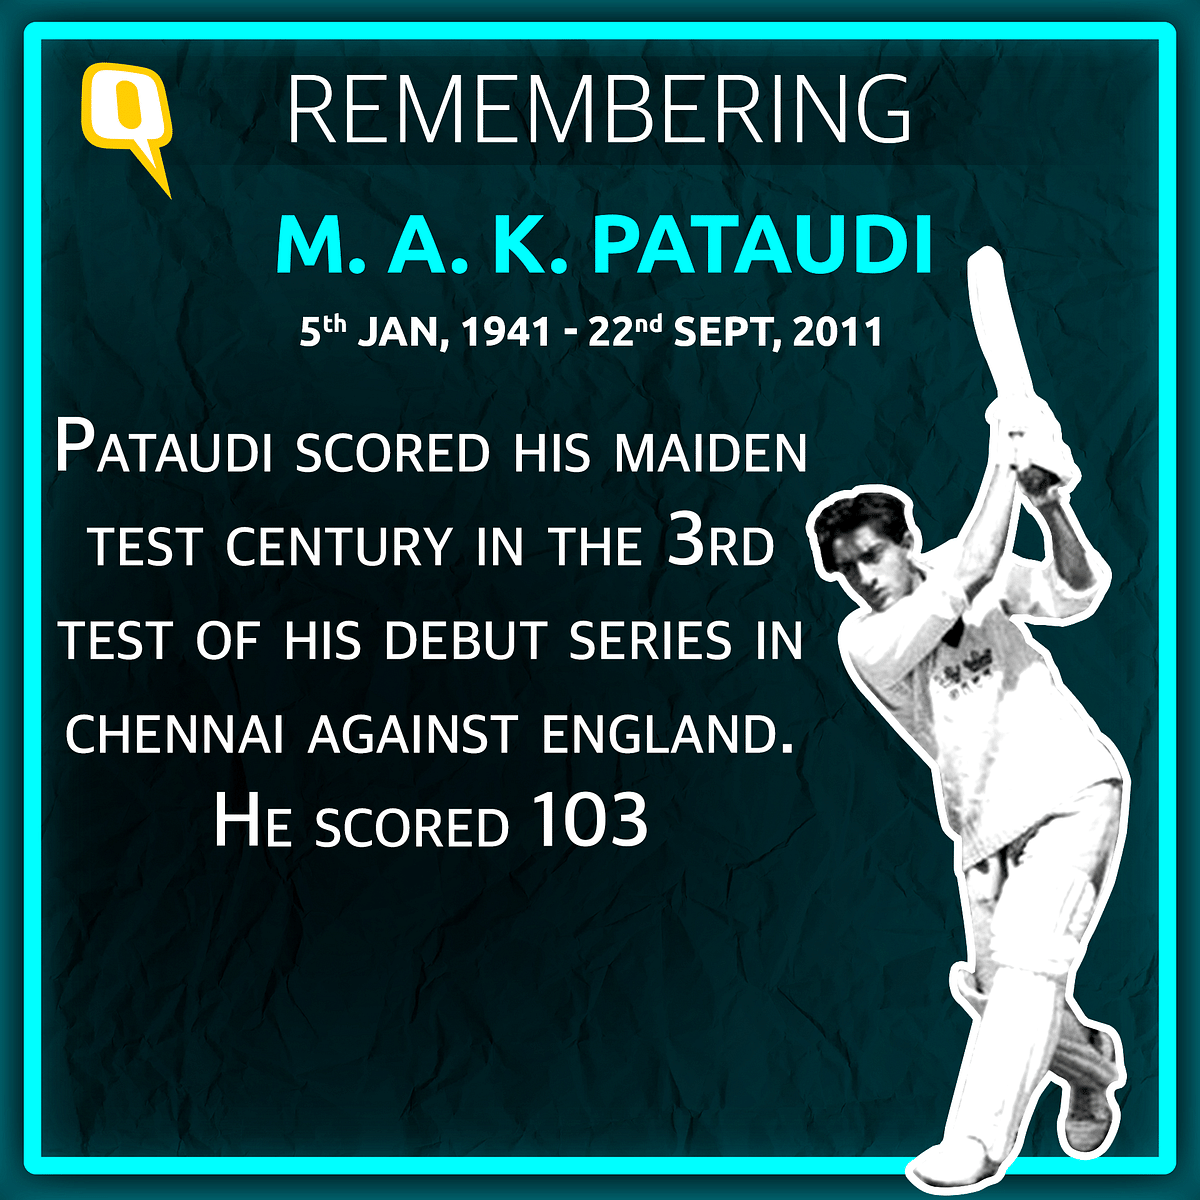 Did you know Tiger Pataudi made his international debut six months after a fatal accident?